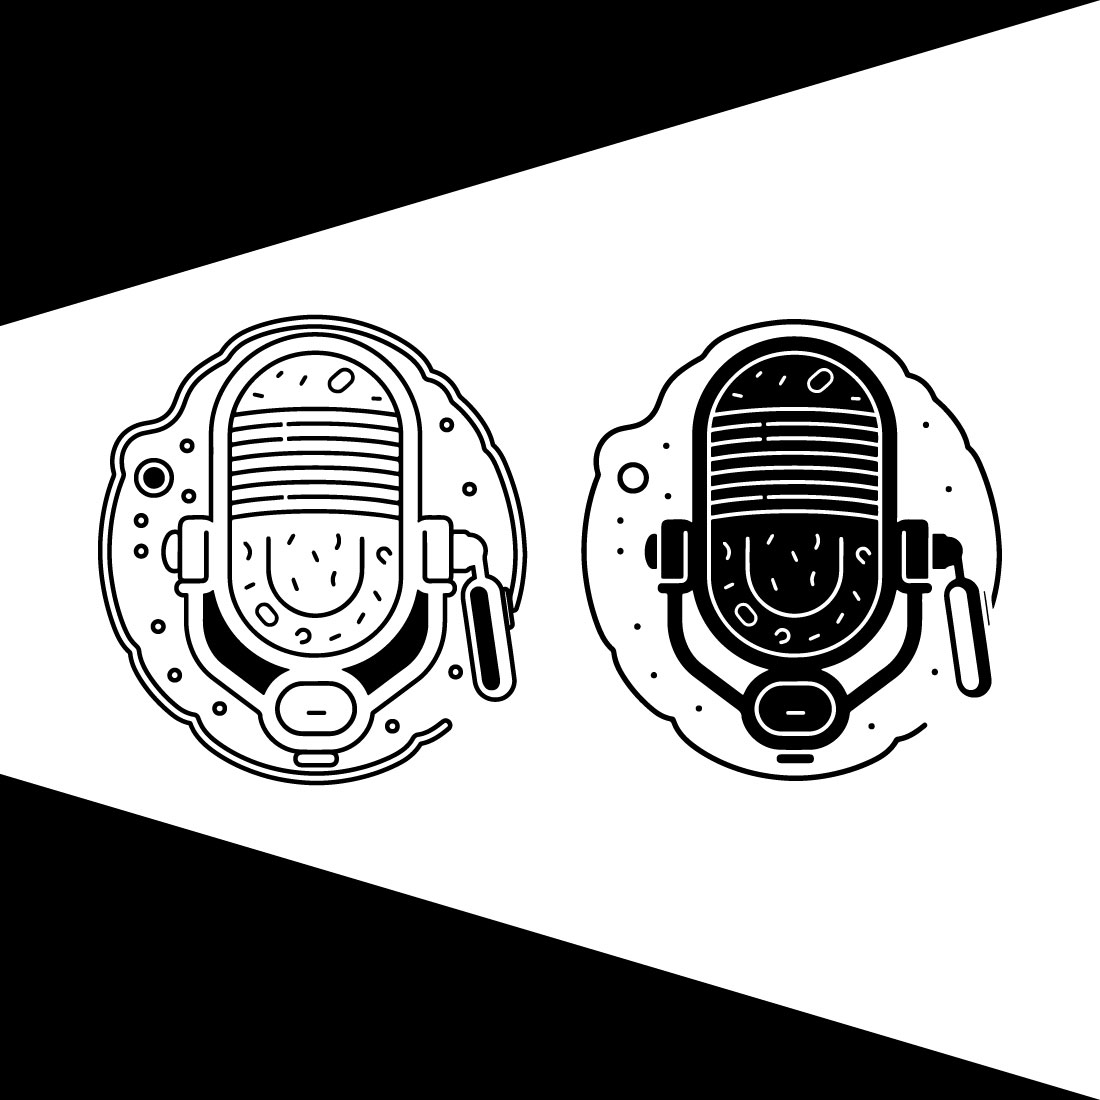 Podcast and Audio line icon set vector,Microphone vector icon, Web design icon preview image.